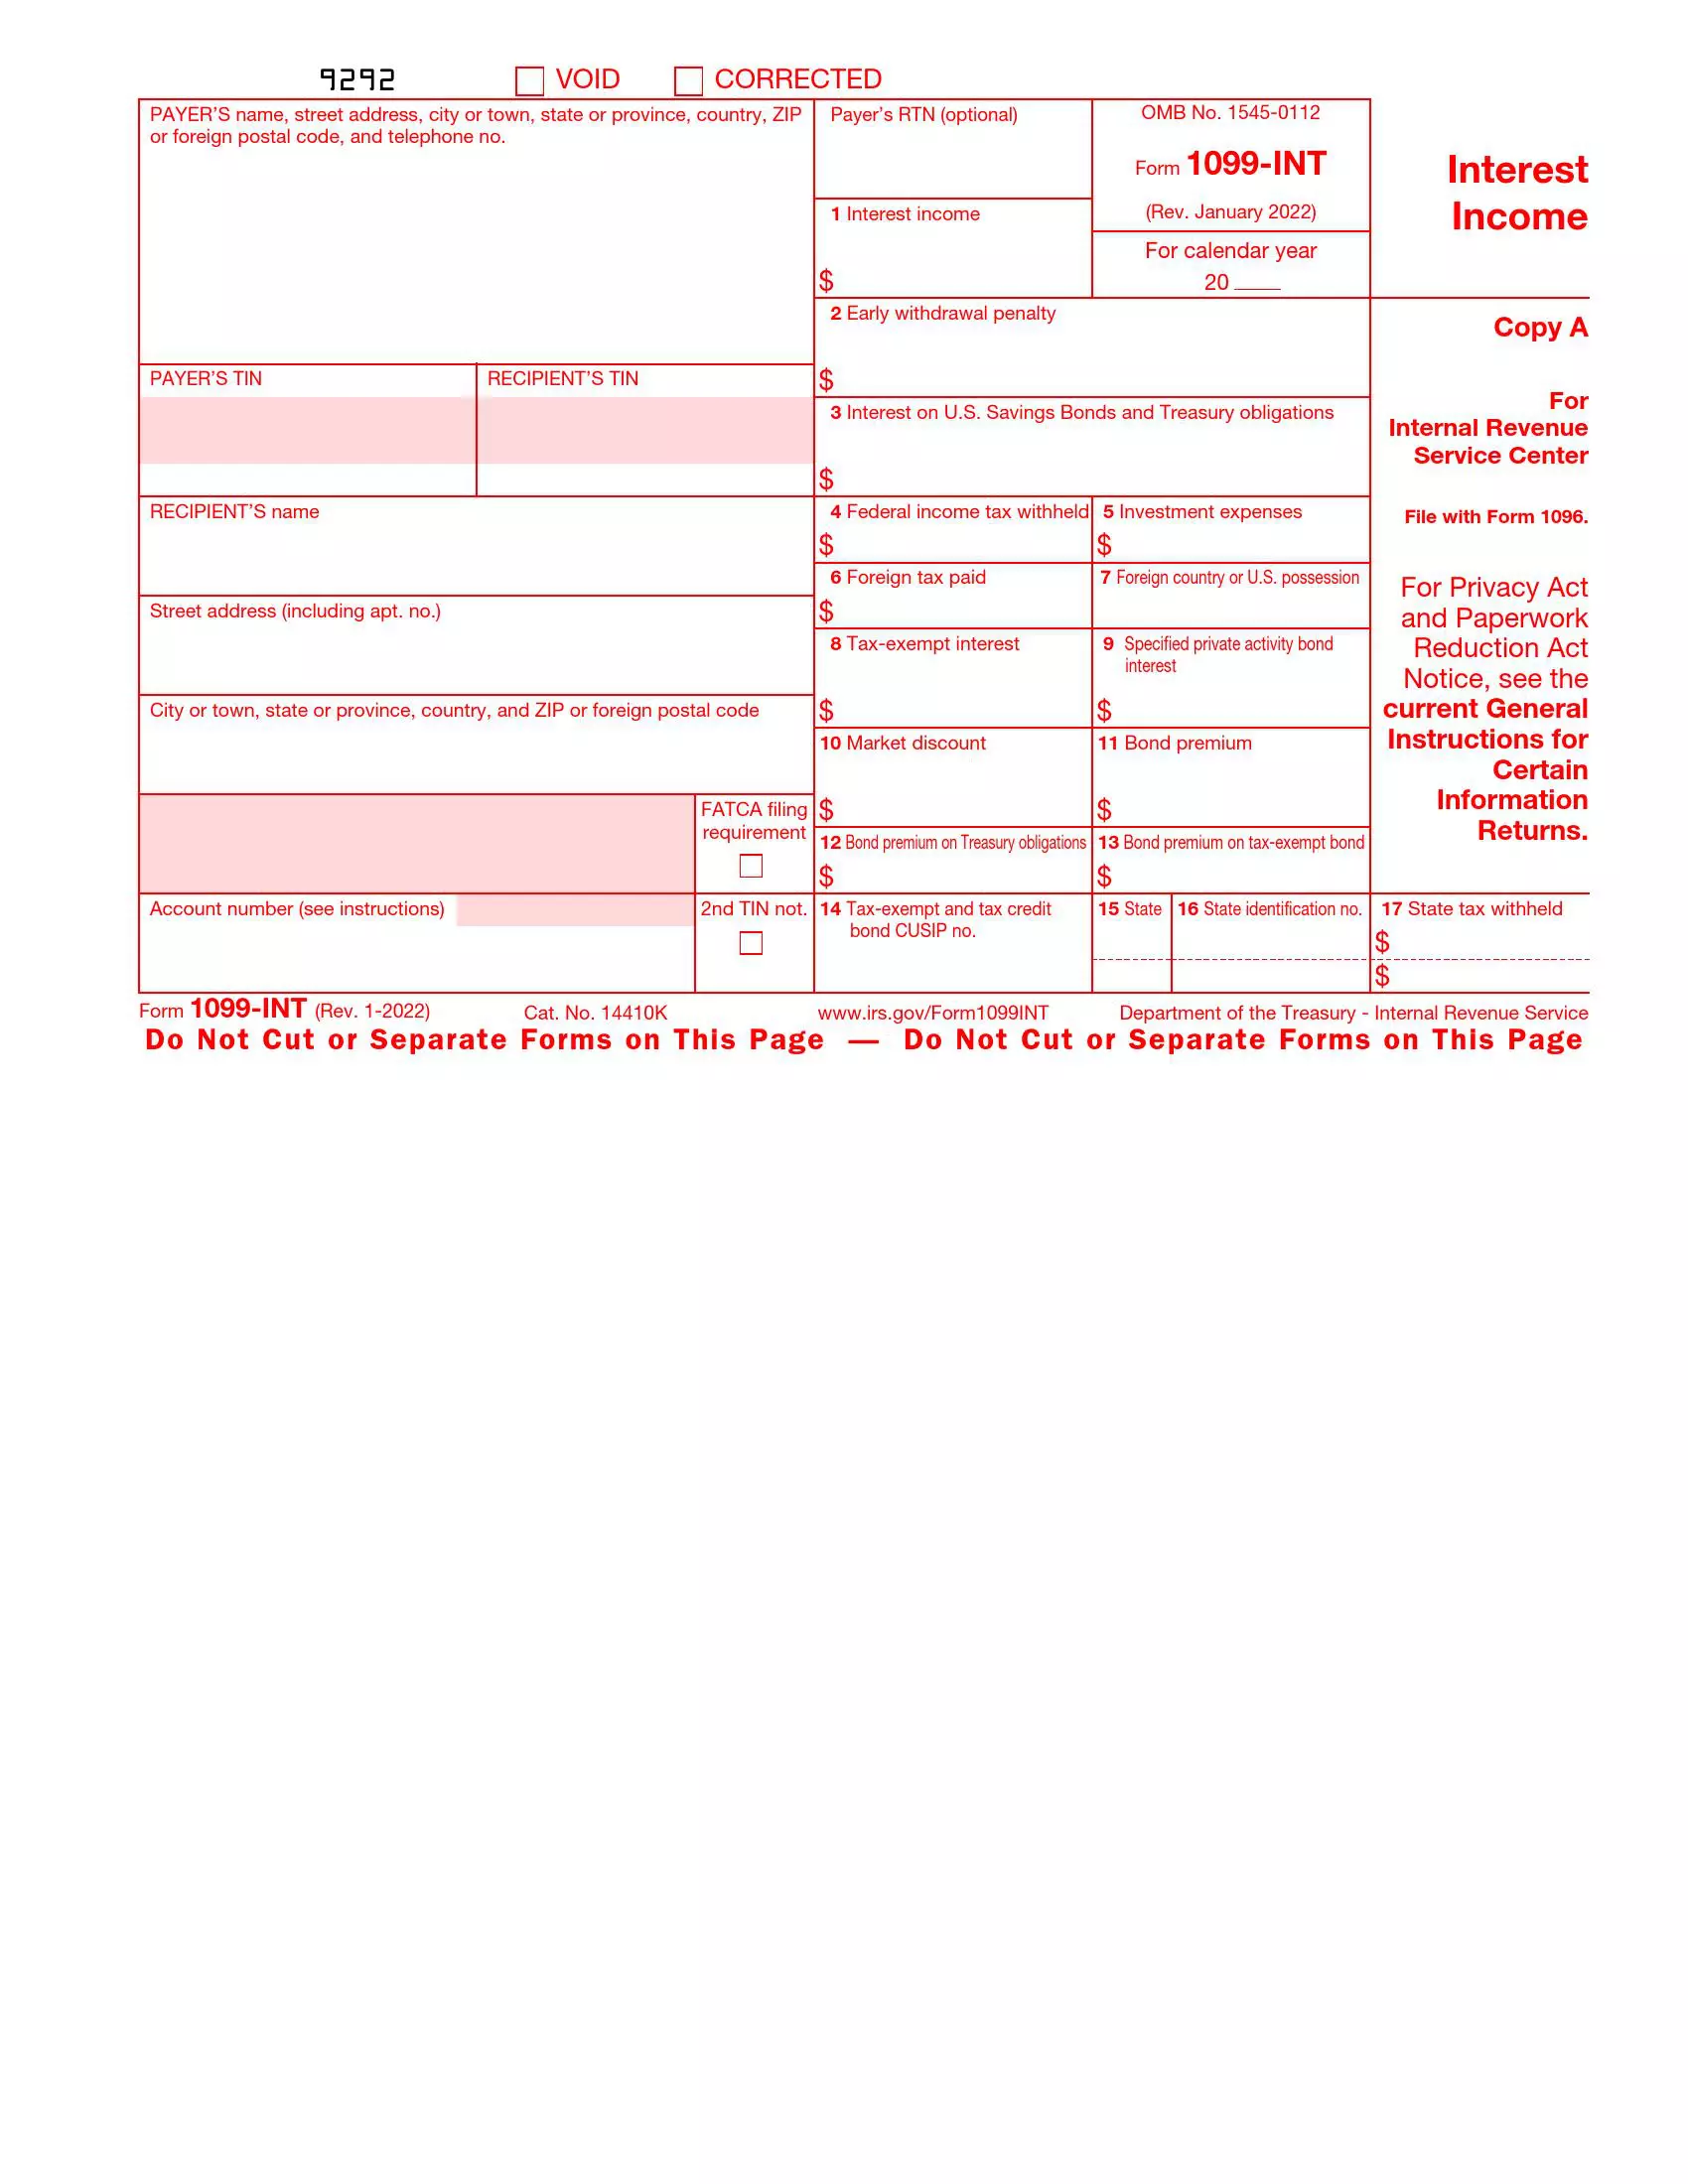 irs form 1099 int rev 01 2022 preview